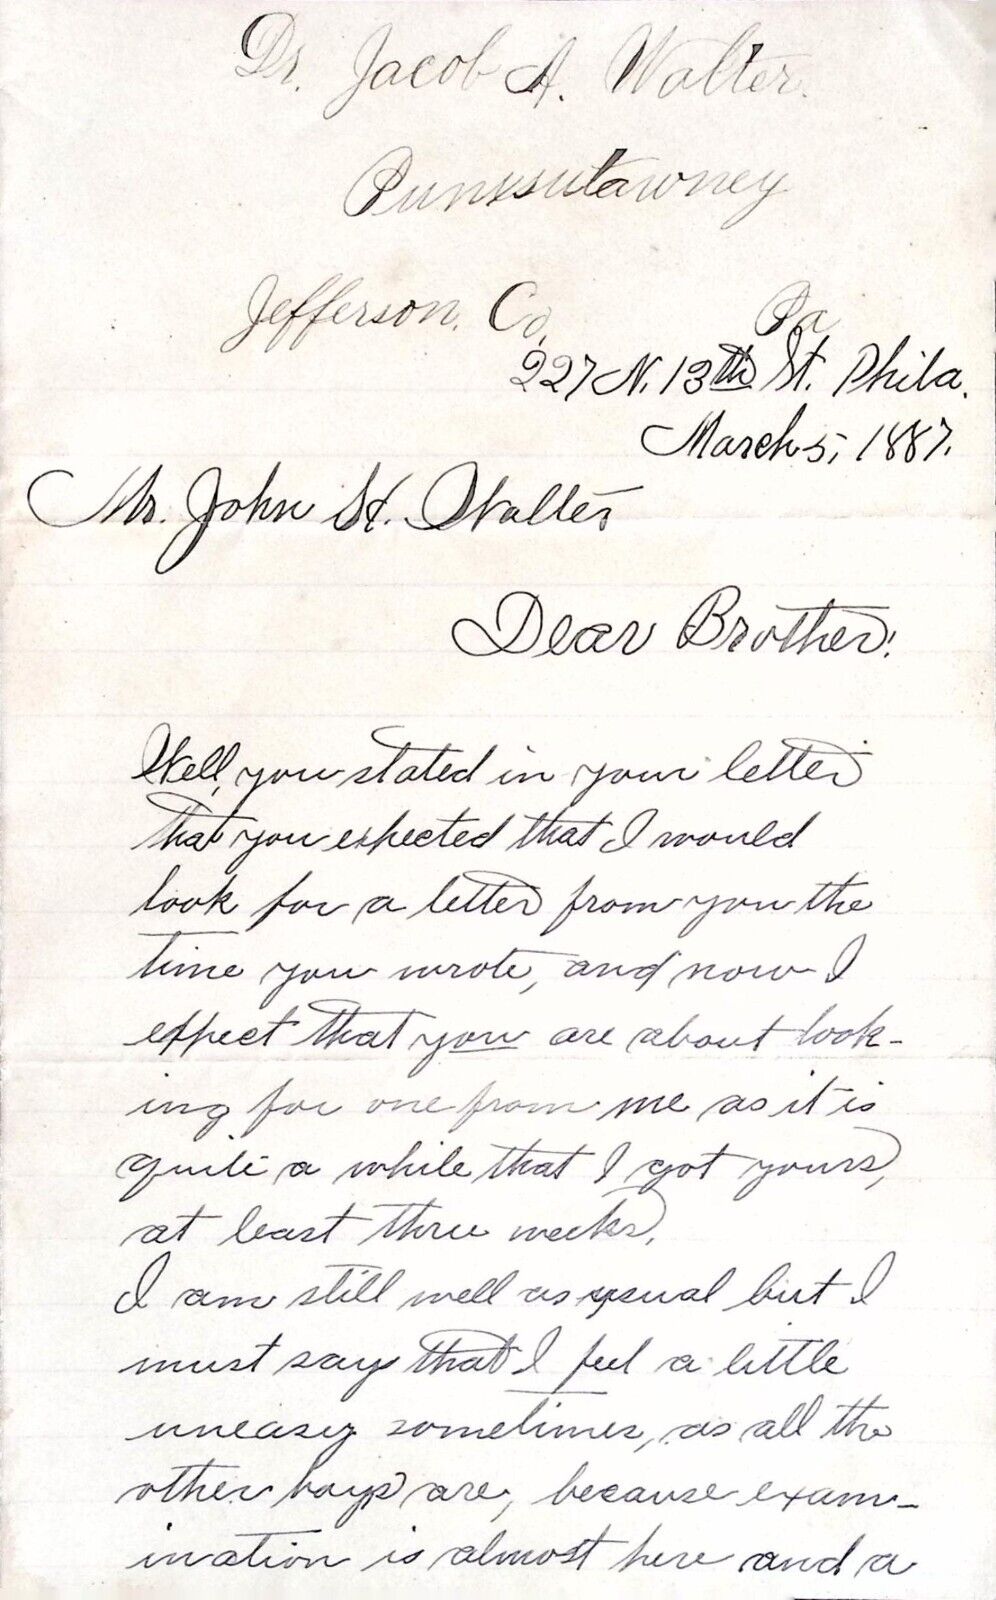 1887 Letter Philadelphia Brother to Brother Dr. Jacob A Walter Student Death